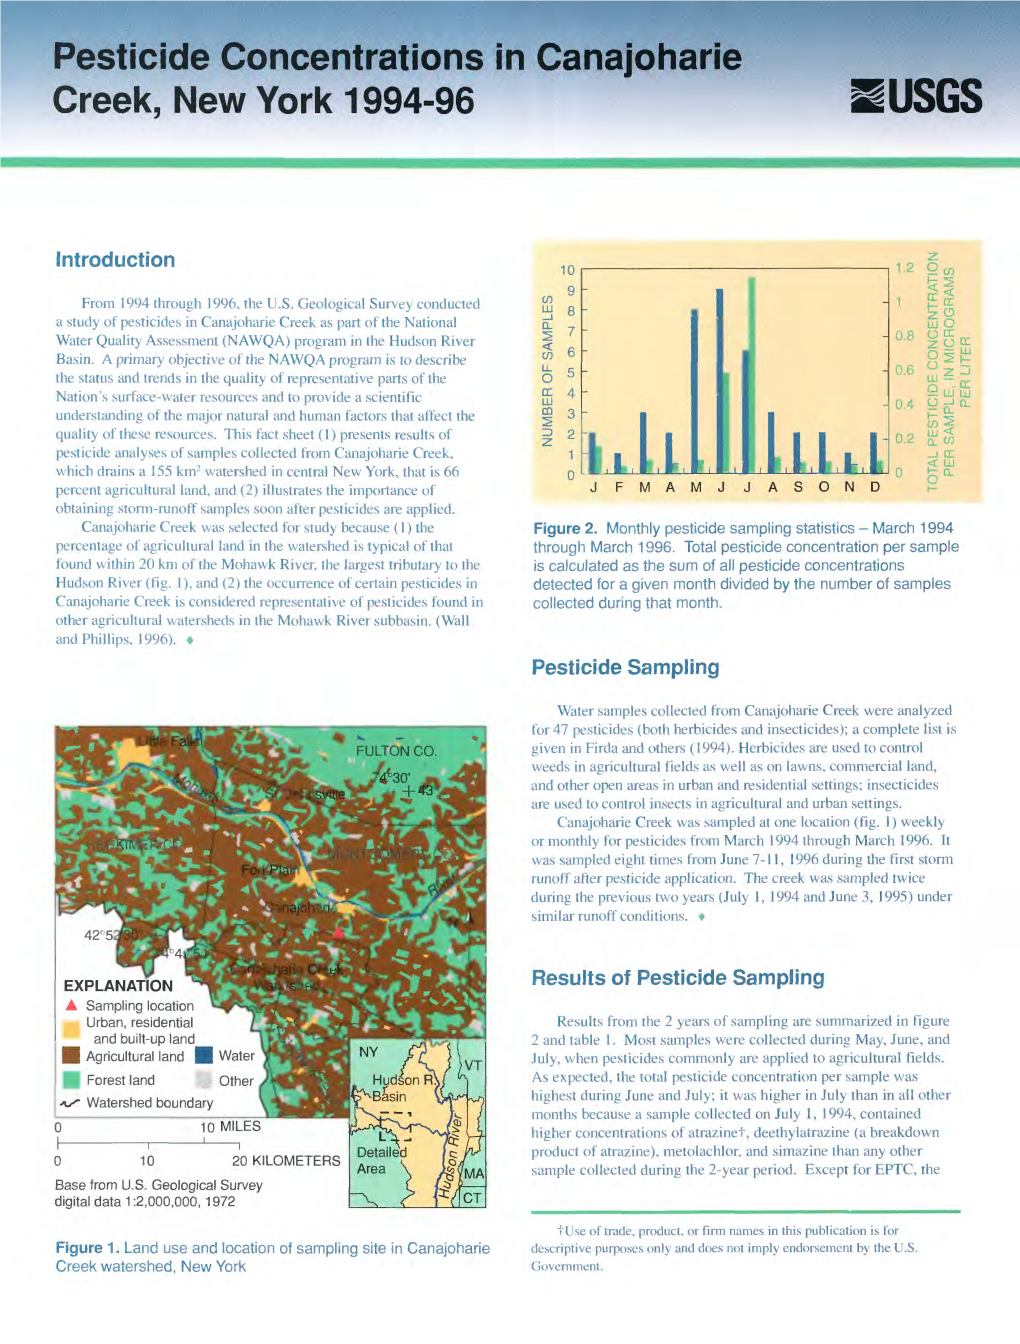 Pesticide Concentrations in Canajoharie Creek, New York 1994-96